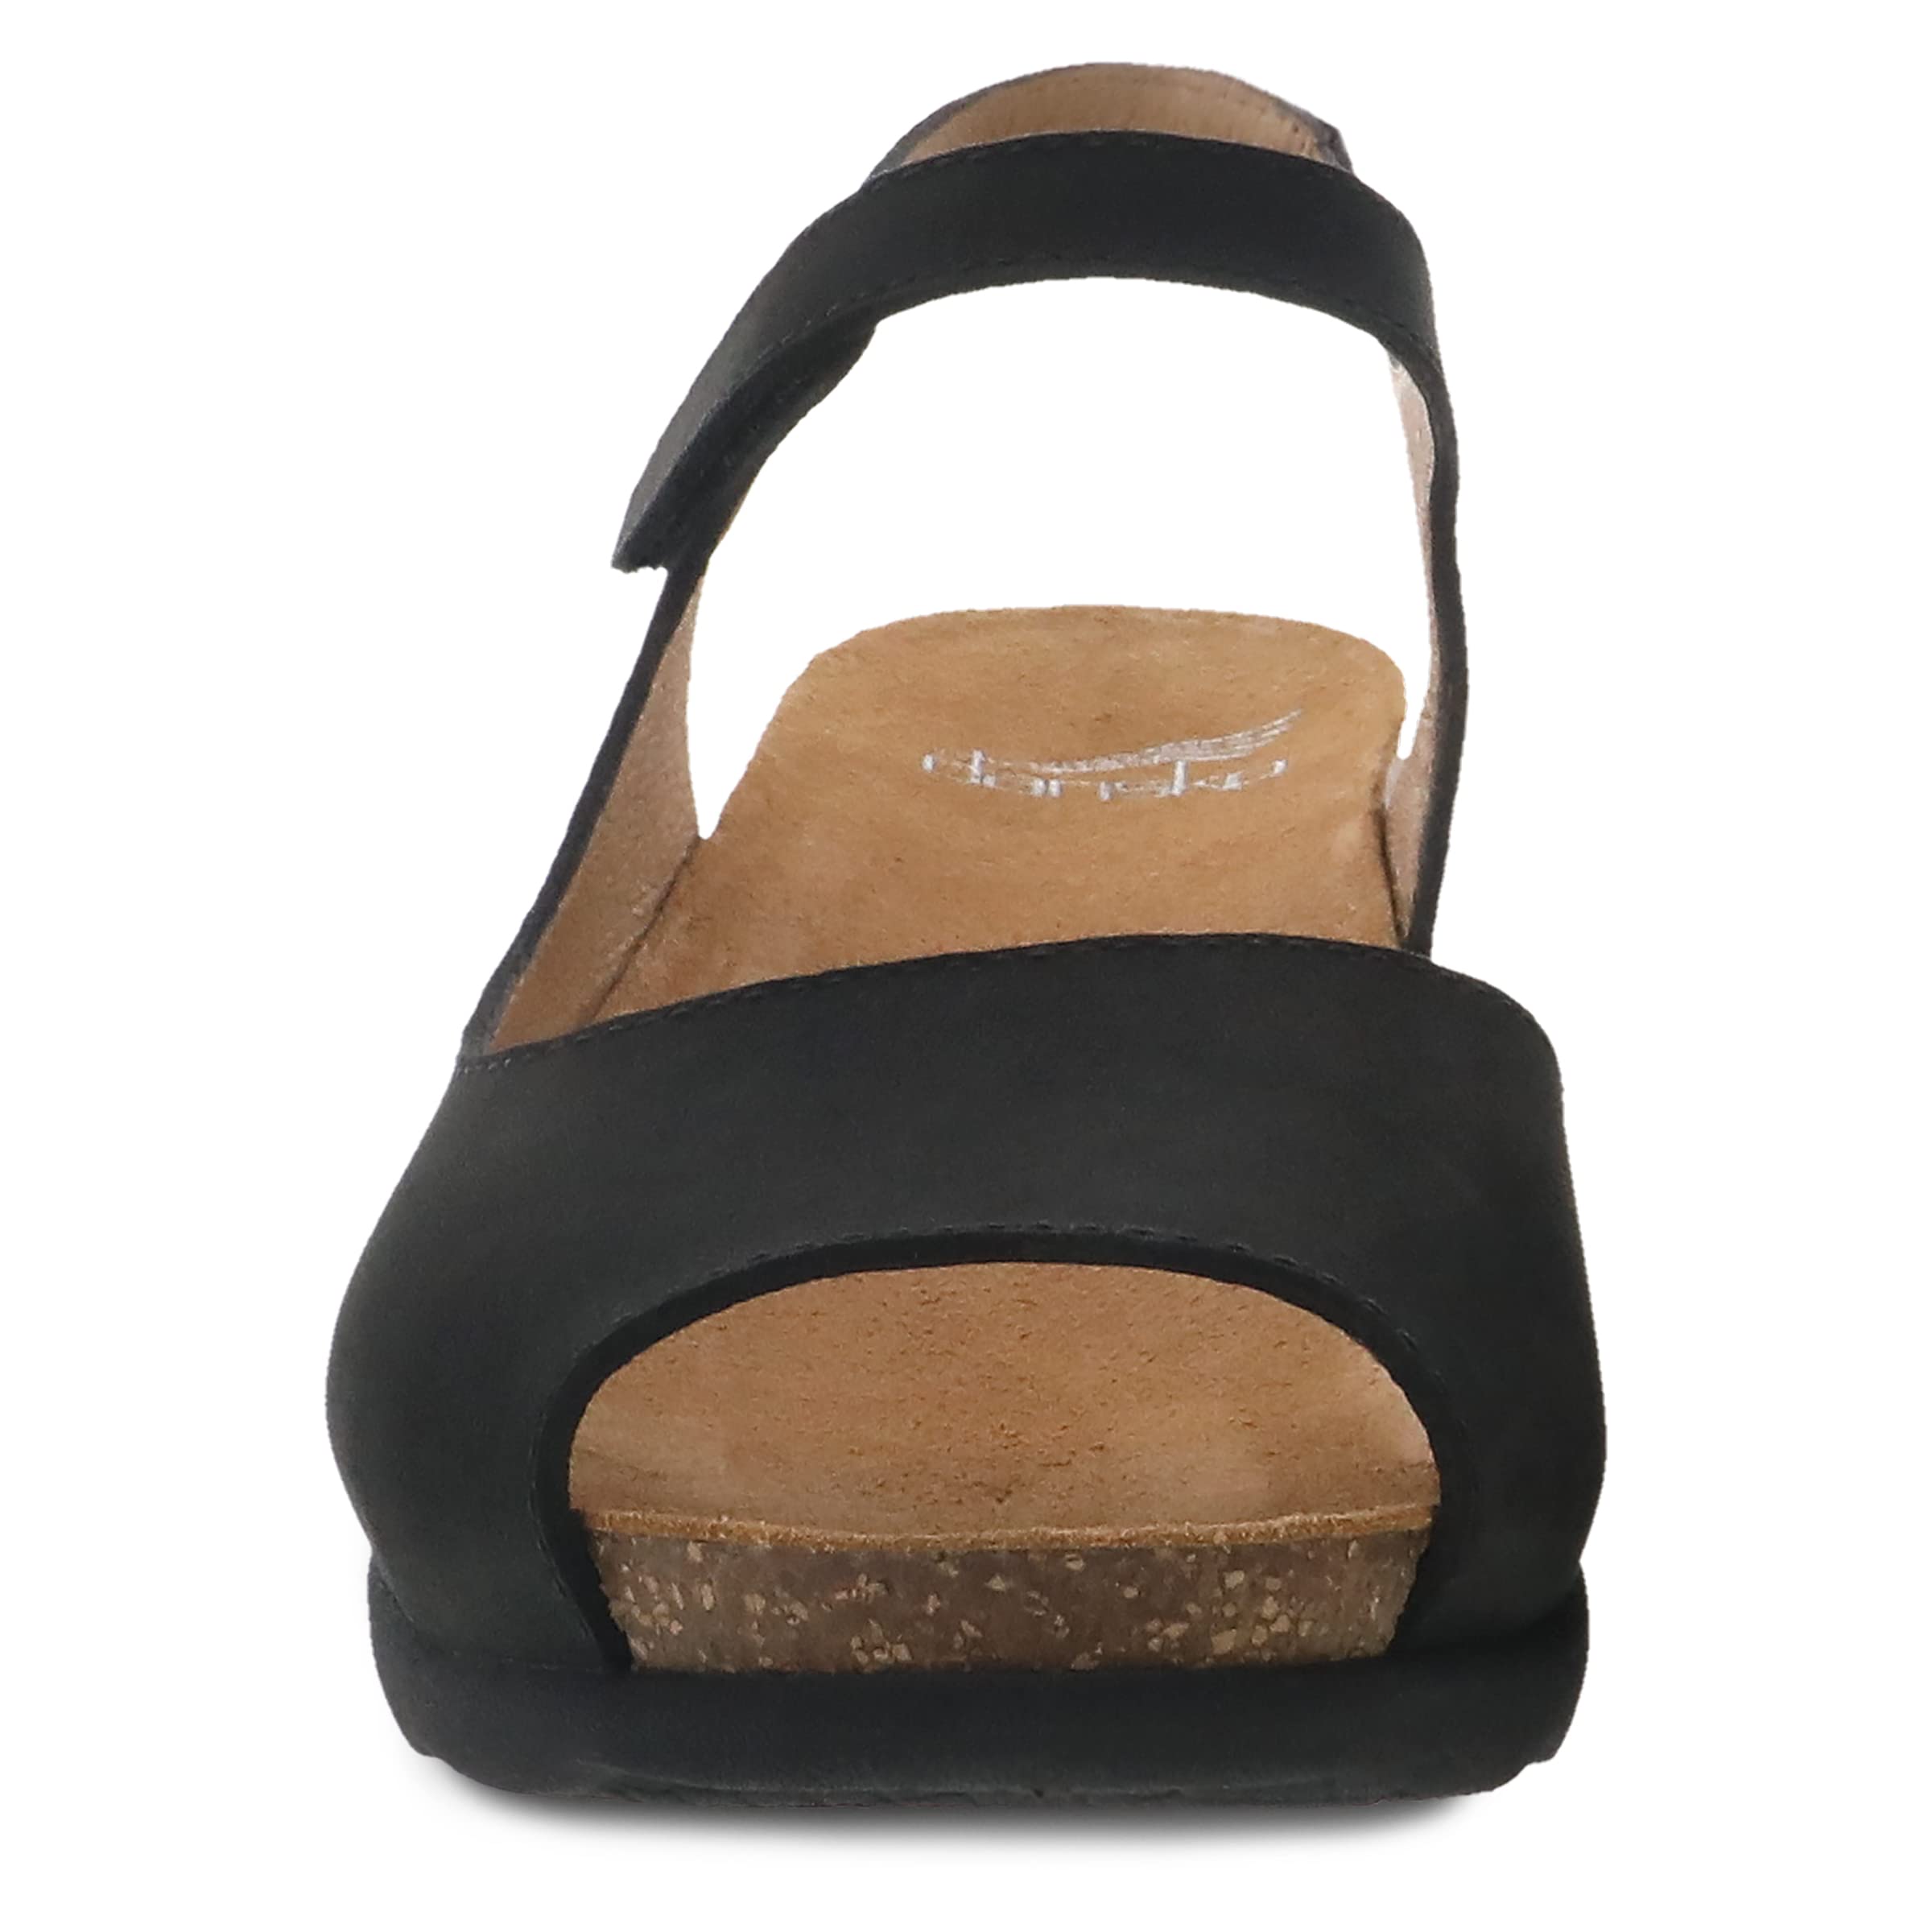 Dansko Marcy Slip-On Wedge Sandal for Women – Comfortable Wedge Shoes with Arch Support –Adjustable Hook & Loop Strap – Versatile Casual to Dressy Footwear – Lightweight Rubber Outsole